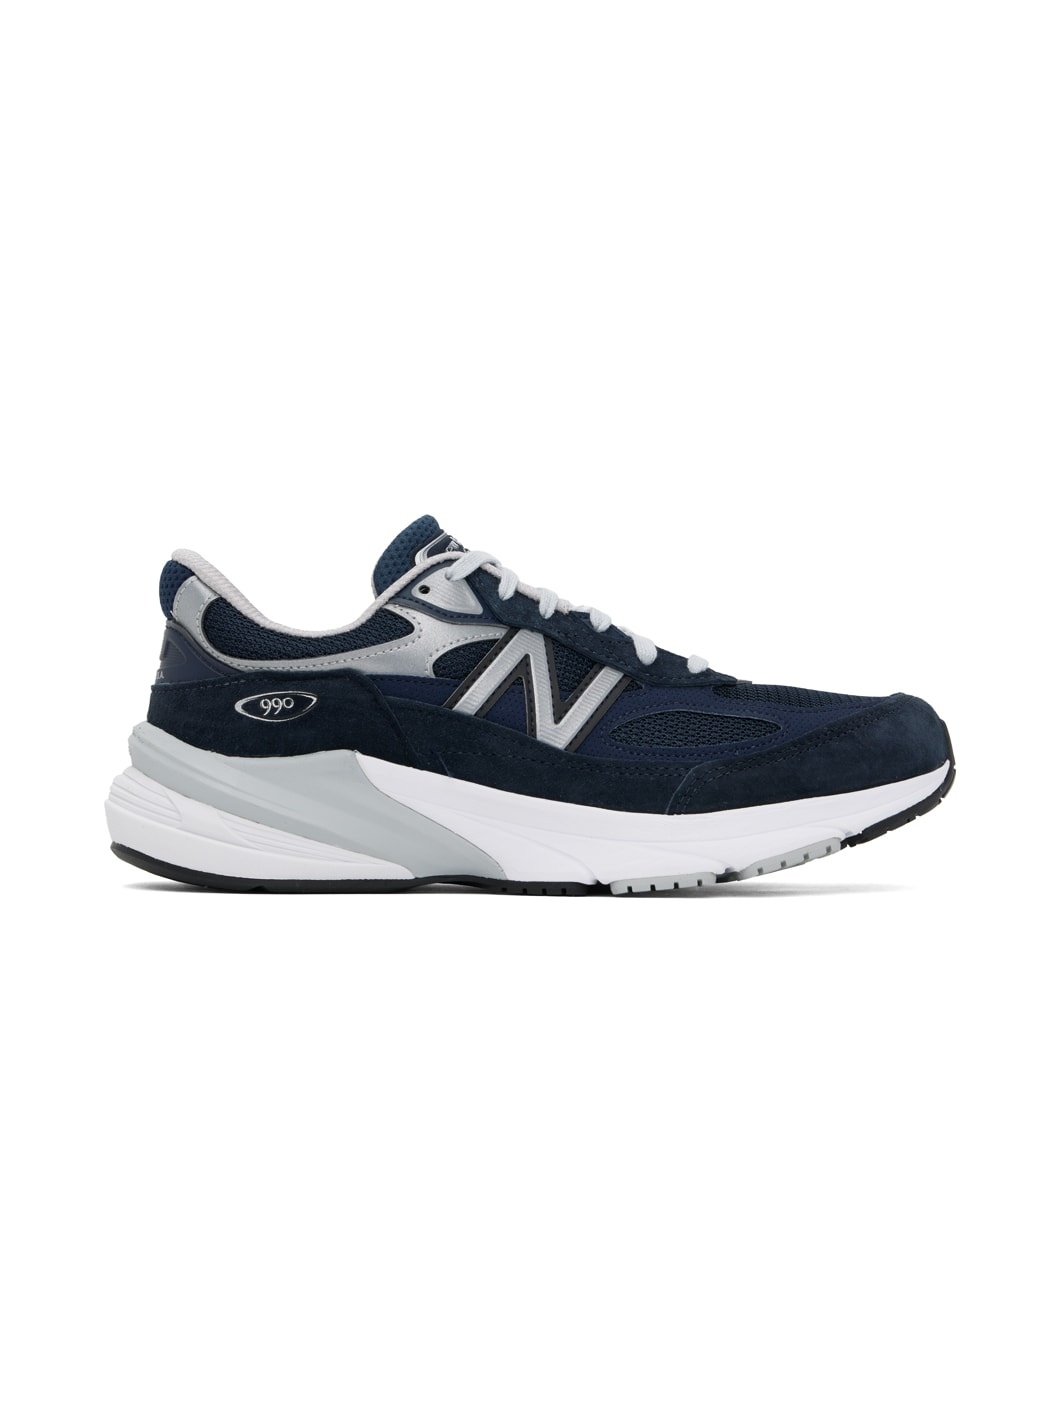 Navy Made in USA 990v6 Sneakers - 1